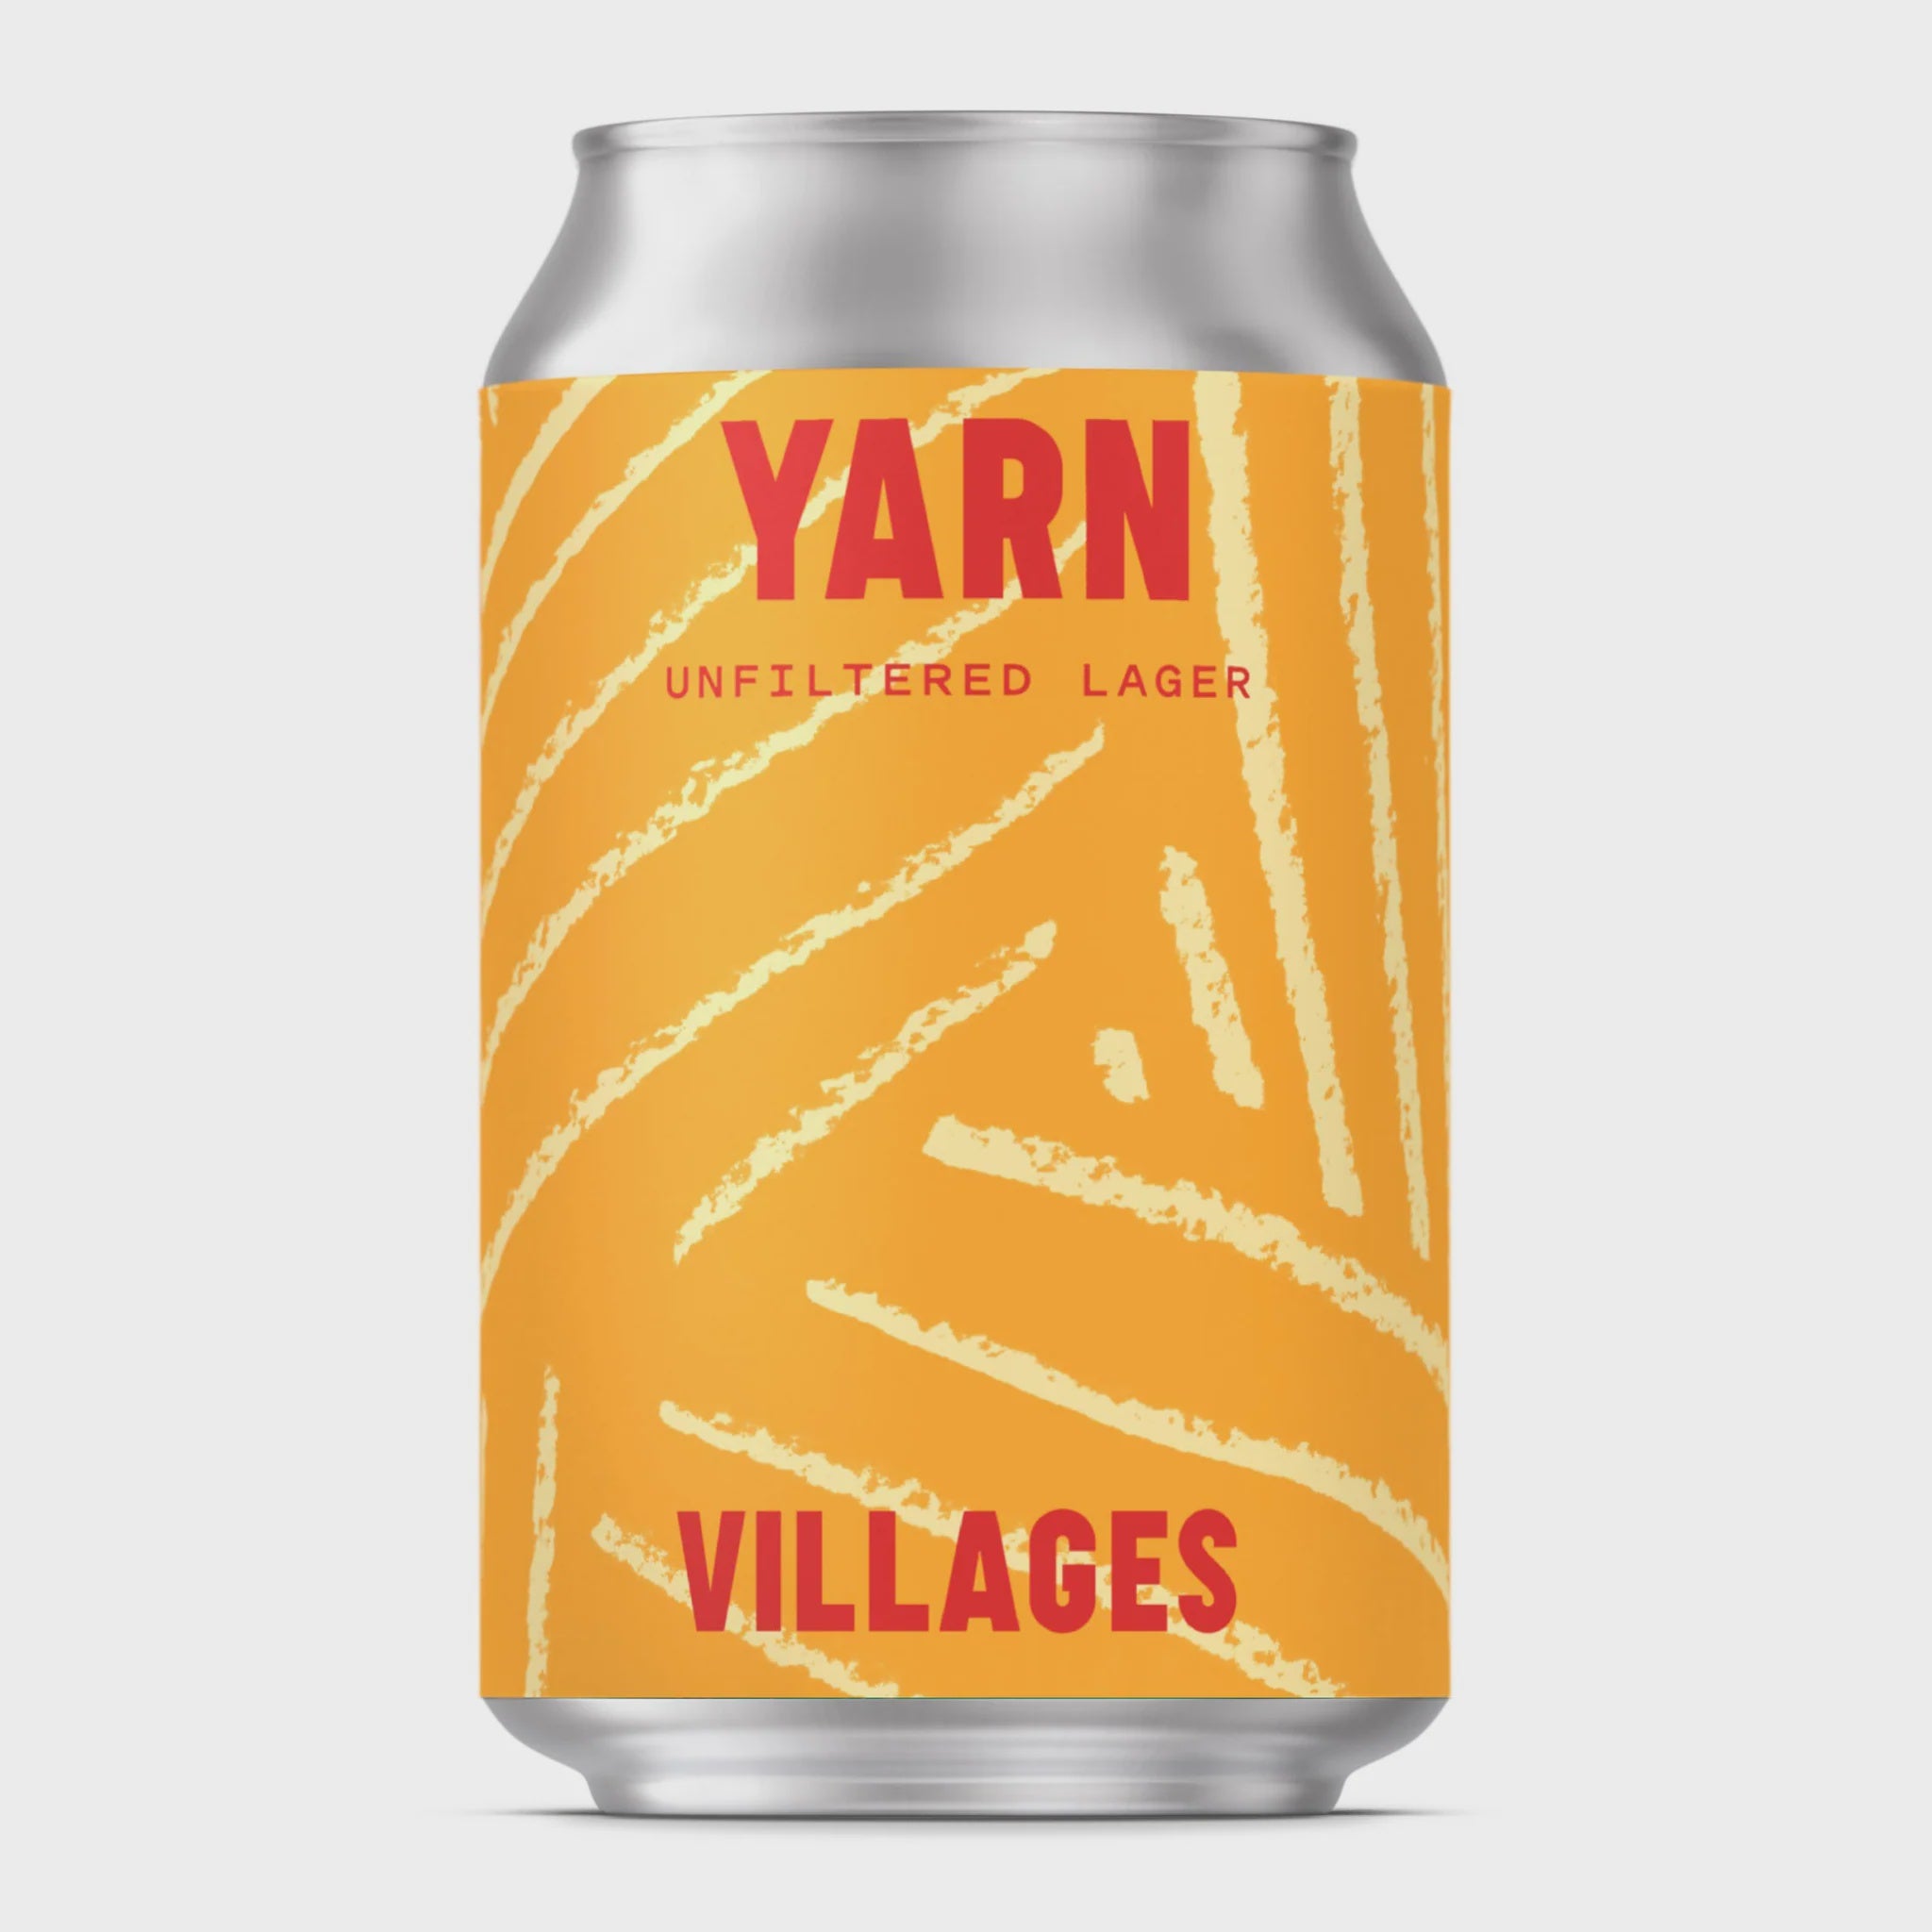 Yarn Unfiltered lager 4.4% (330ml)